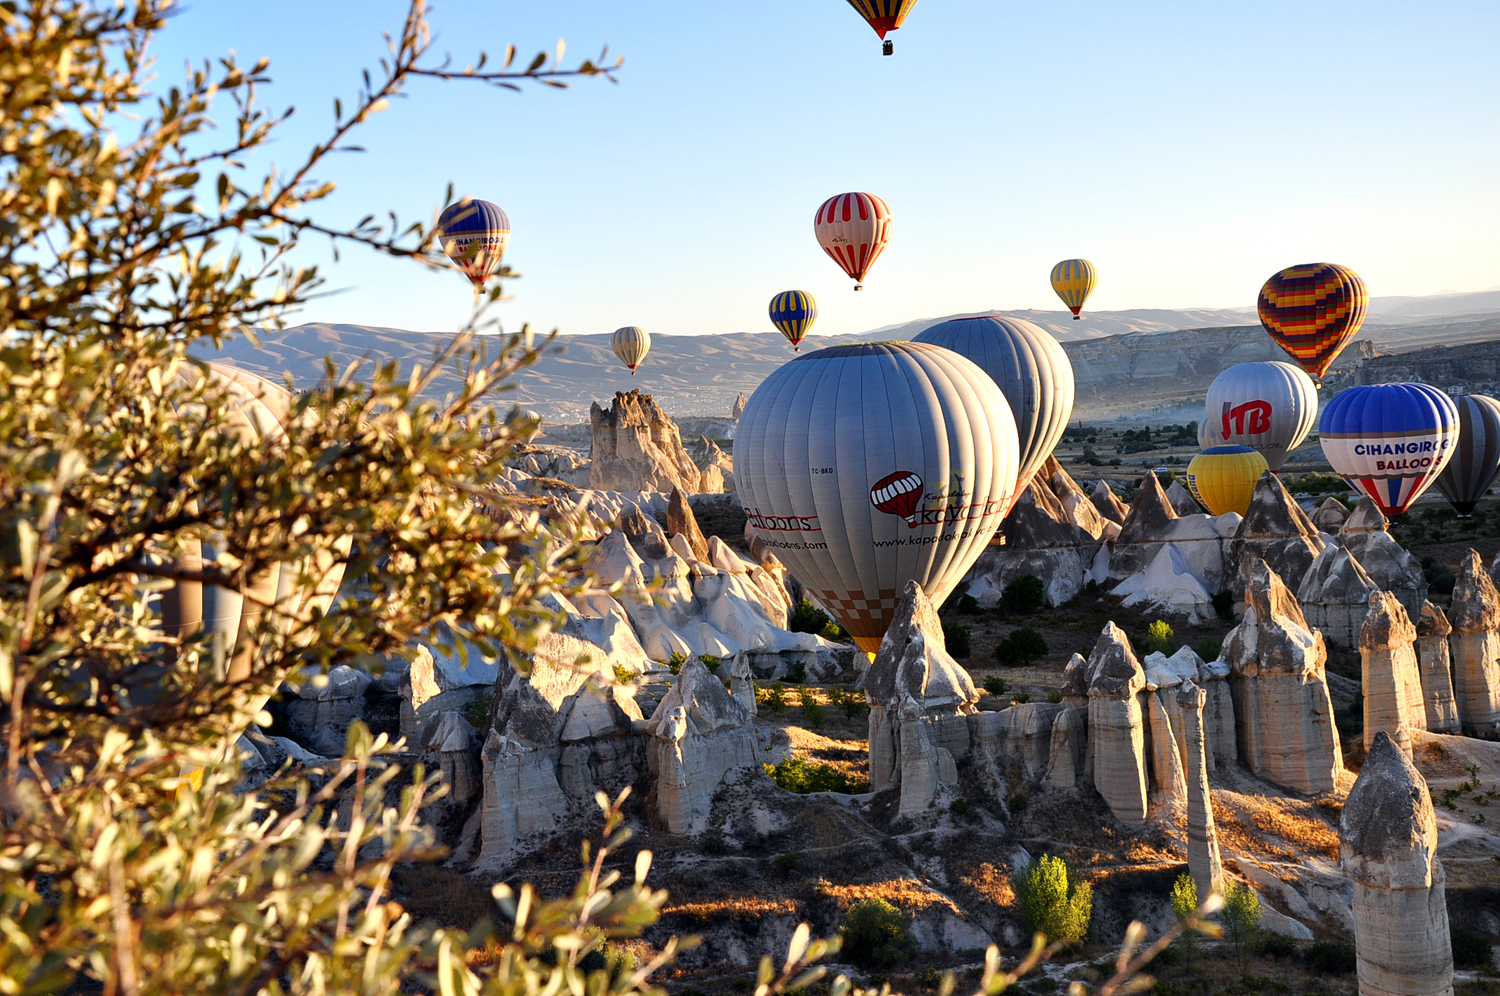 Balloons above mountain peaks in the ancient Turkish region of Cappadocia